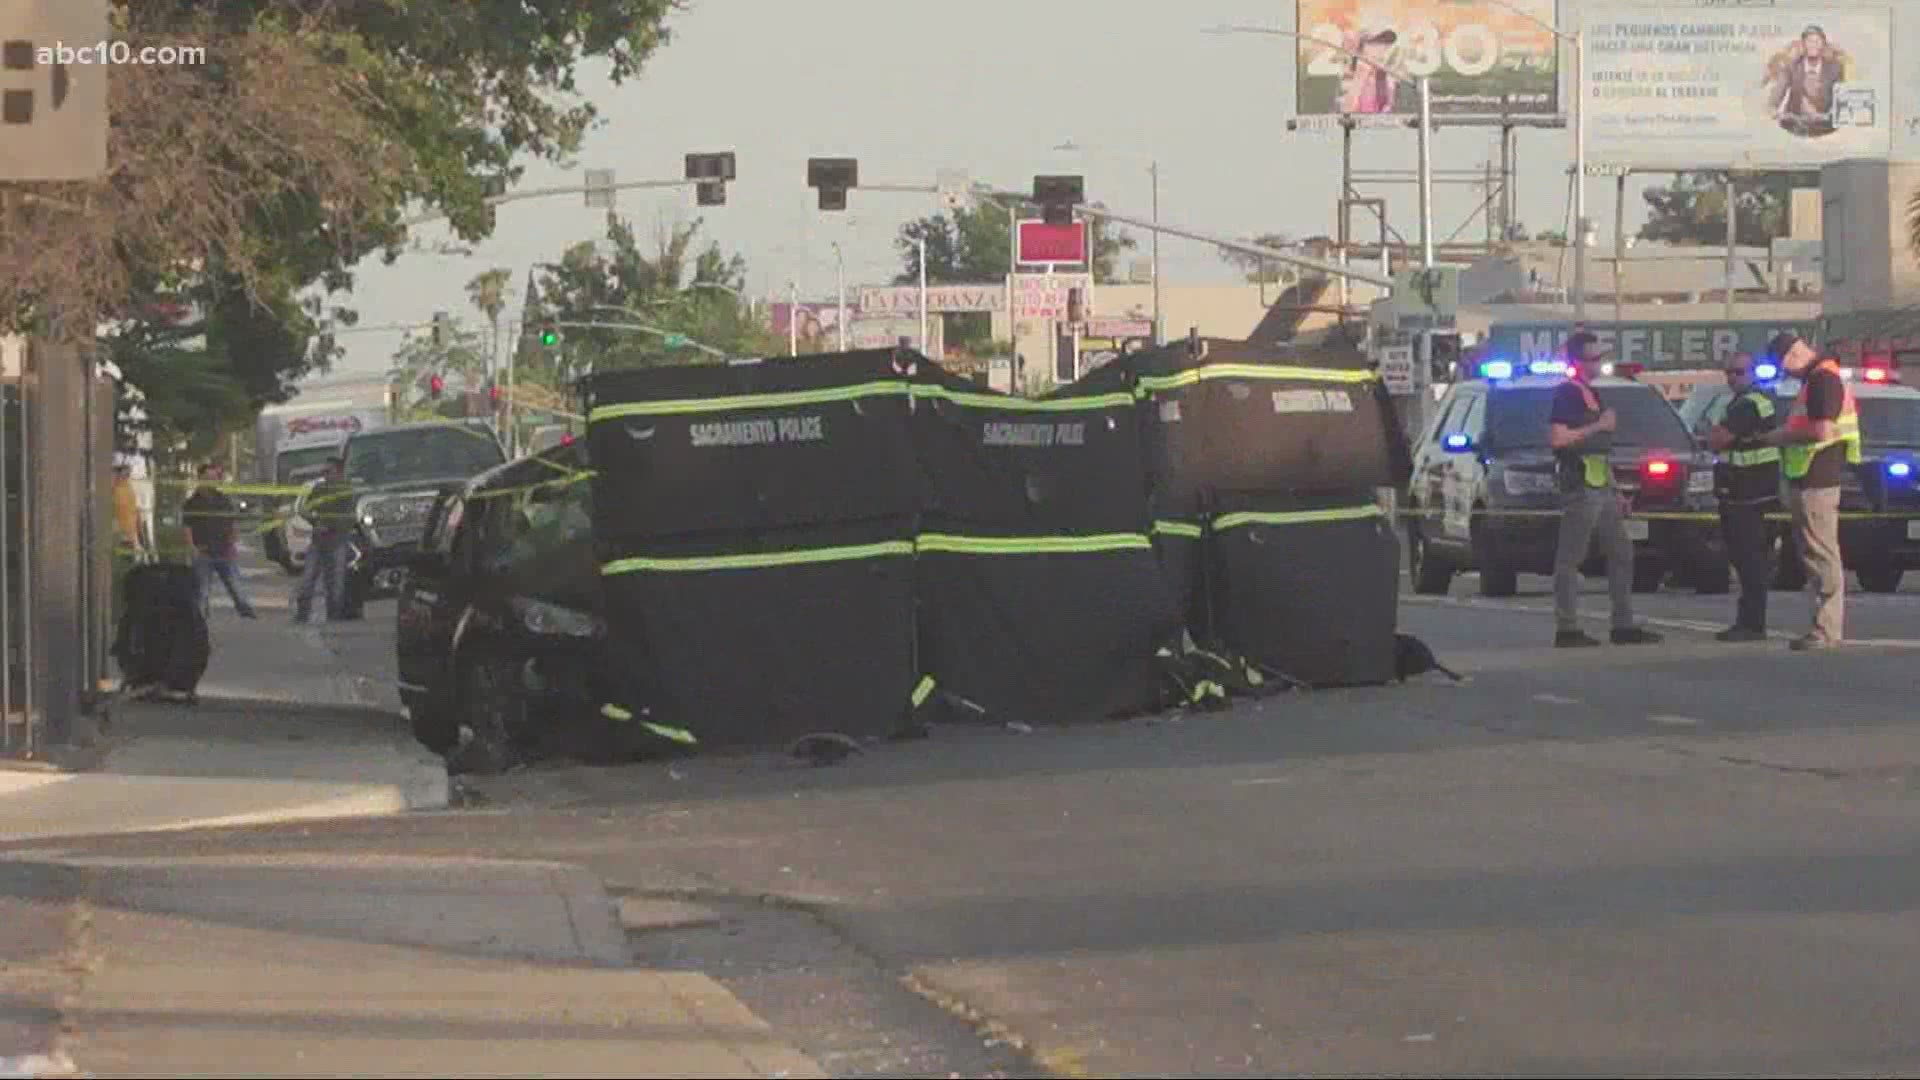 The crashed happened in the area of Franklin Boulevard and 21st Avenue.